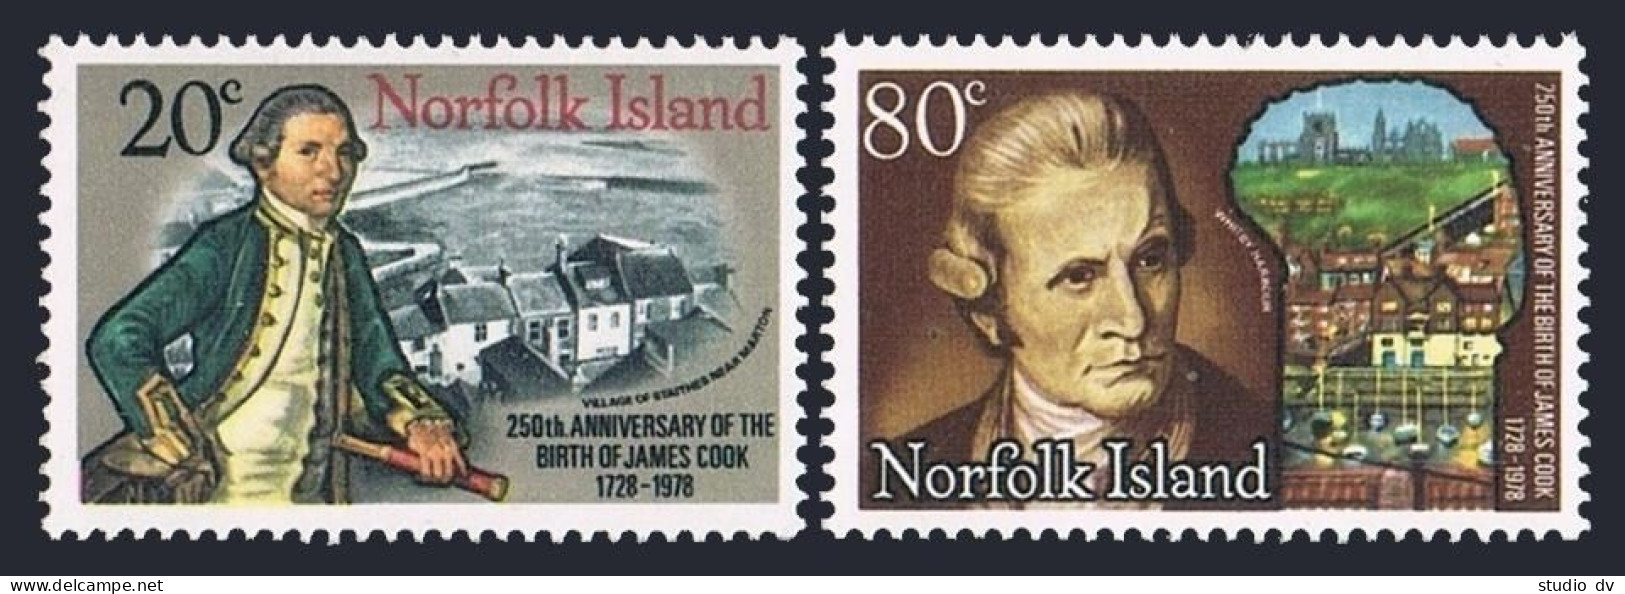 Norfolk 240-241,MNH.Michel 223-224. Capt Cook,1978.Staithes,Whitby Harbor. - Norfolkinsel